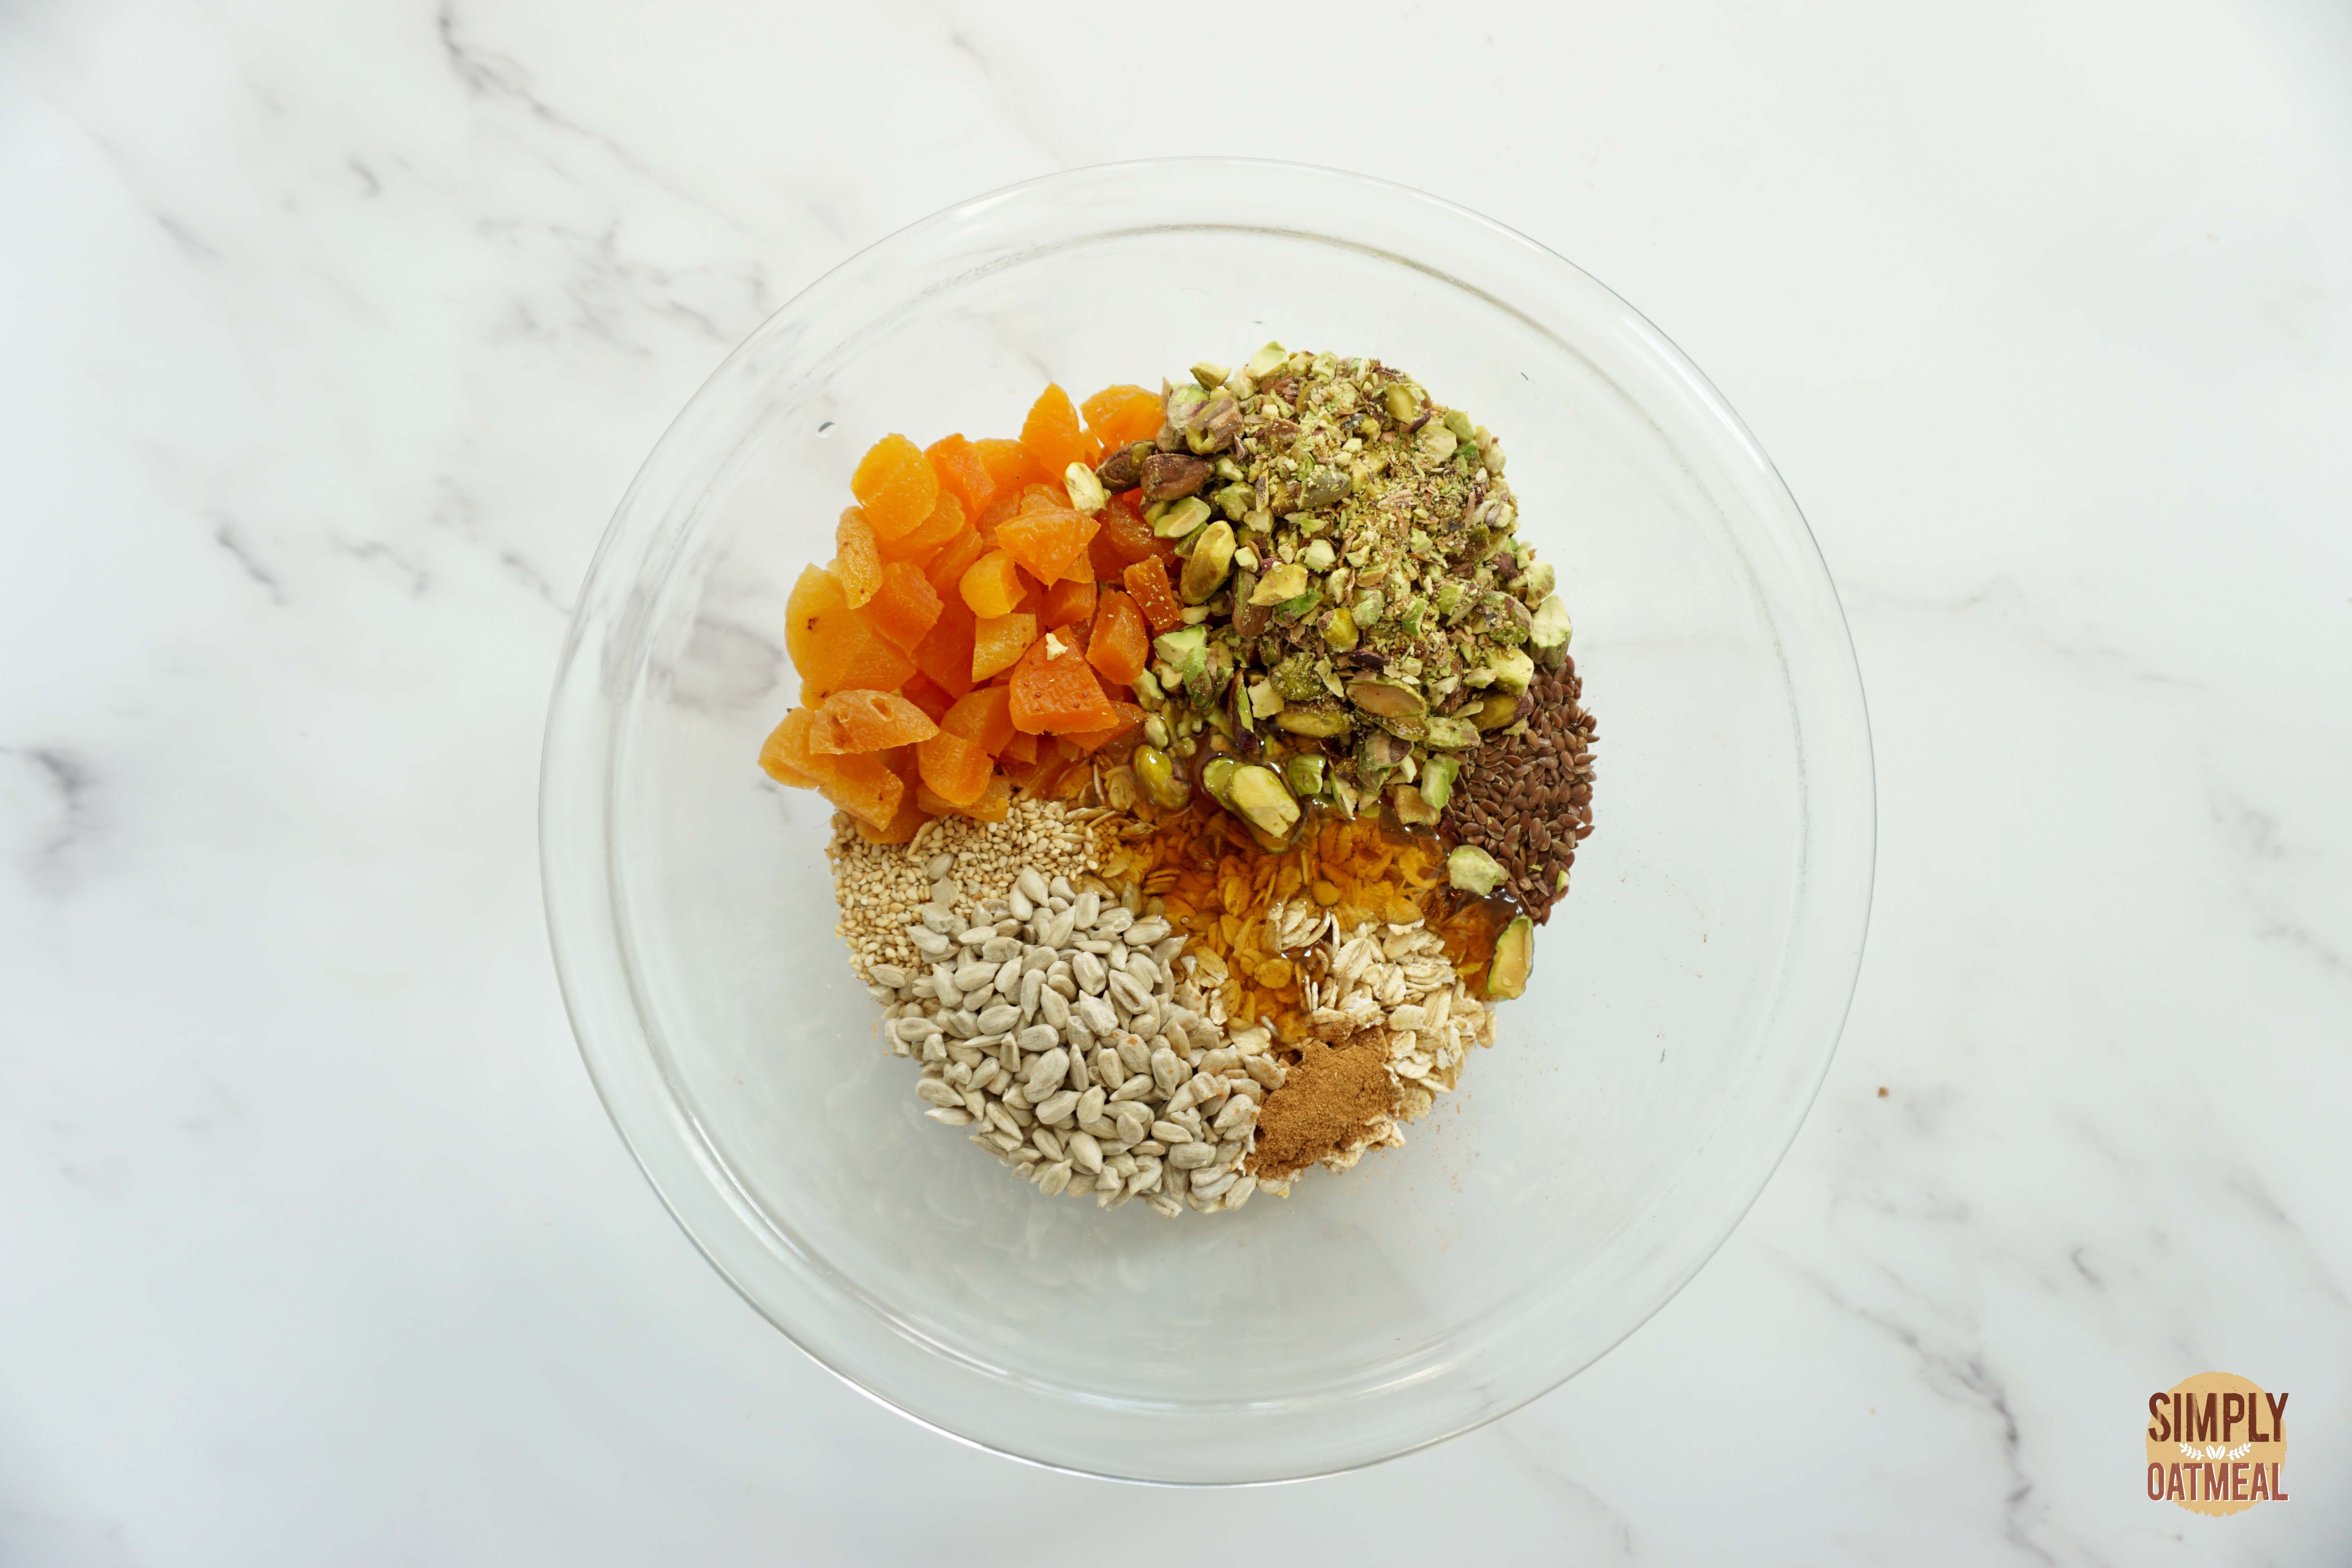 Wet and dry ingredients to make apricot pistachio granola